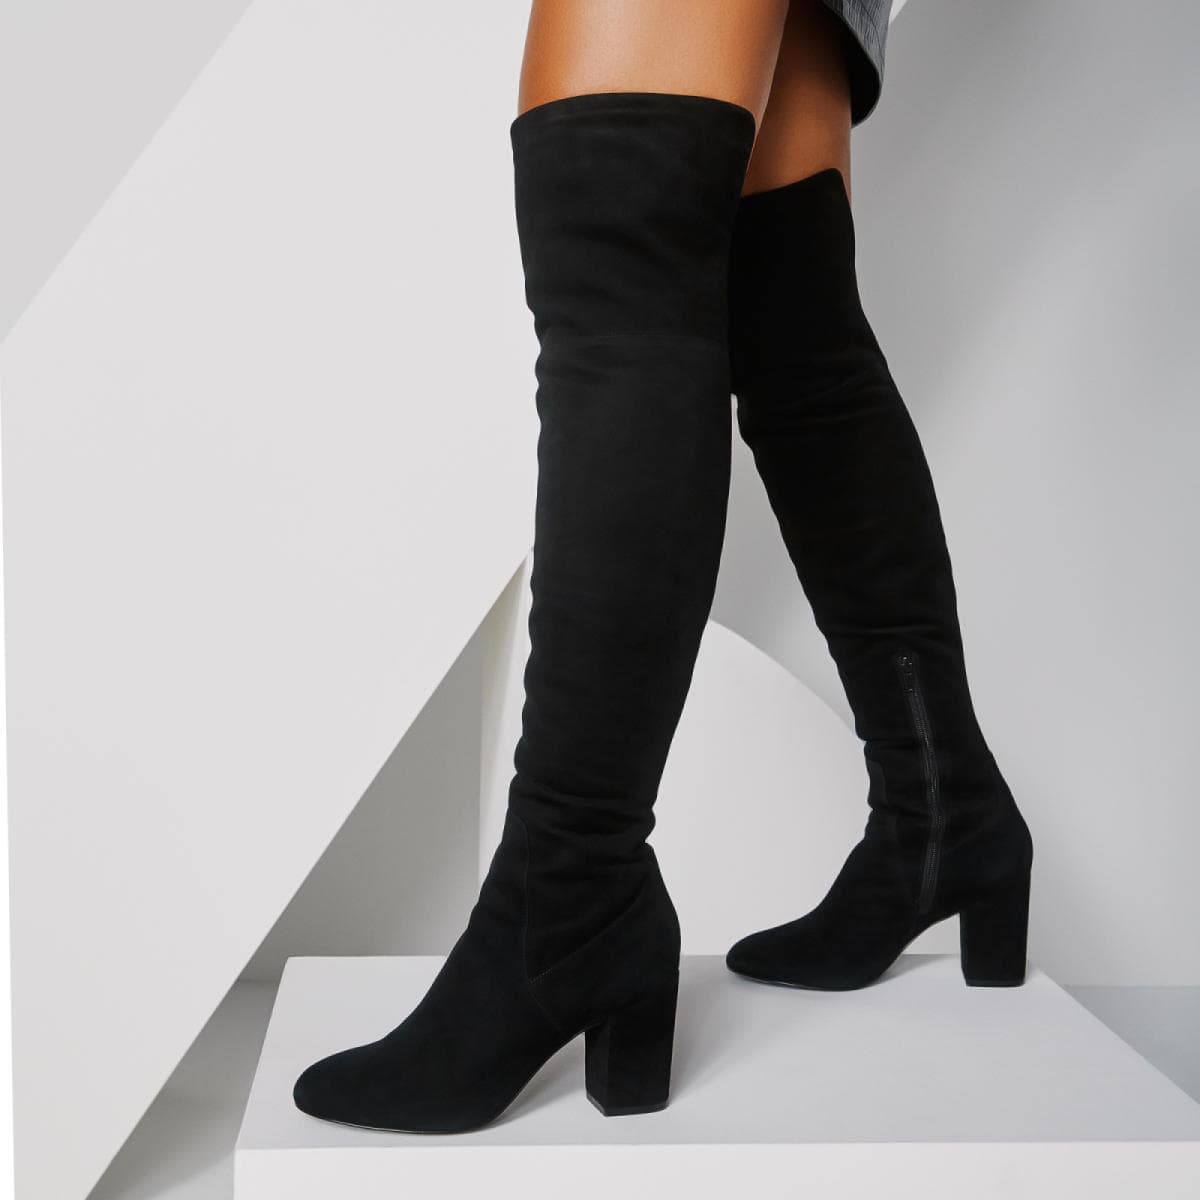 Maede Midnight Black Women's Over-the-knee boots | Aldoshoes.com US